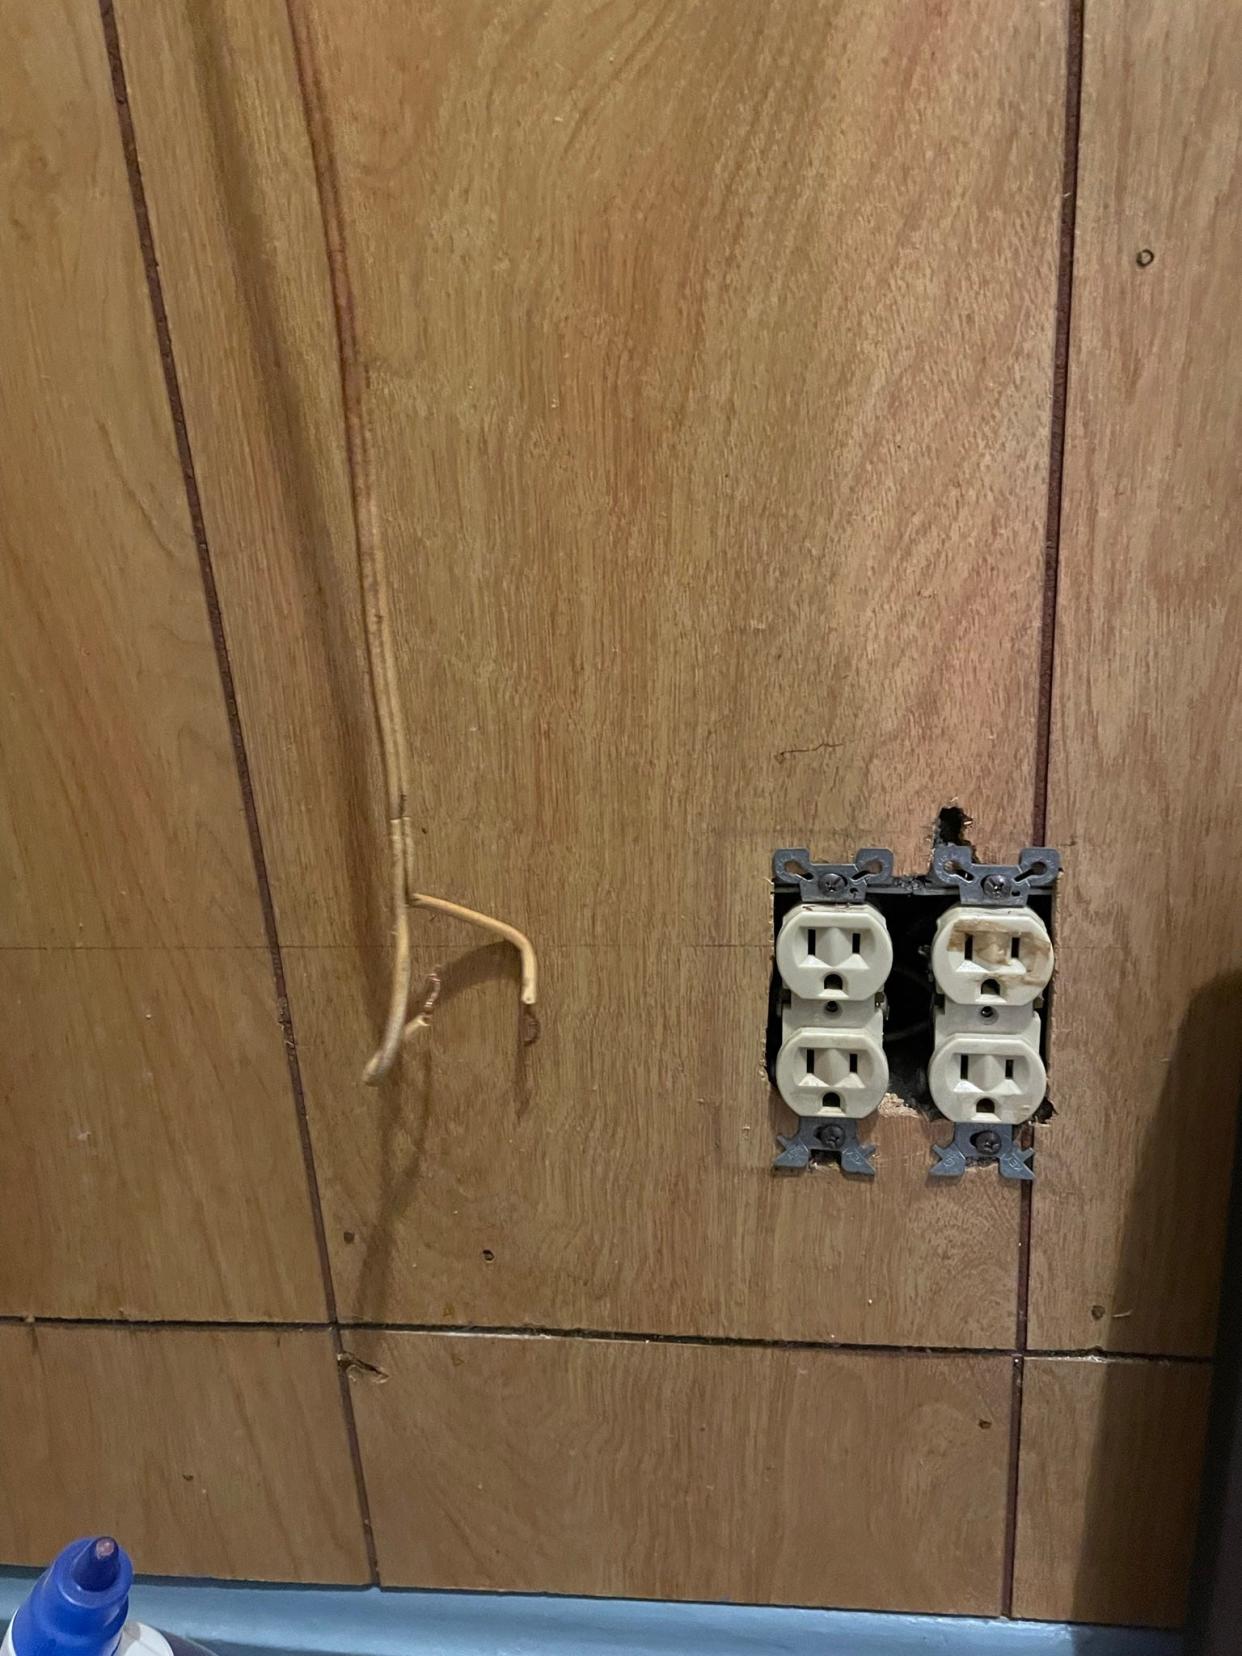 Our Old House Handyman found this "scary" outlet and wiring in Daughter #2's new-to-her old house.